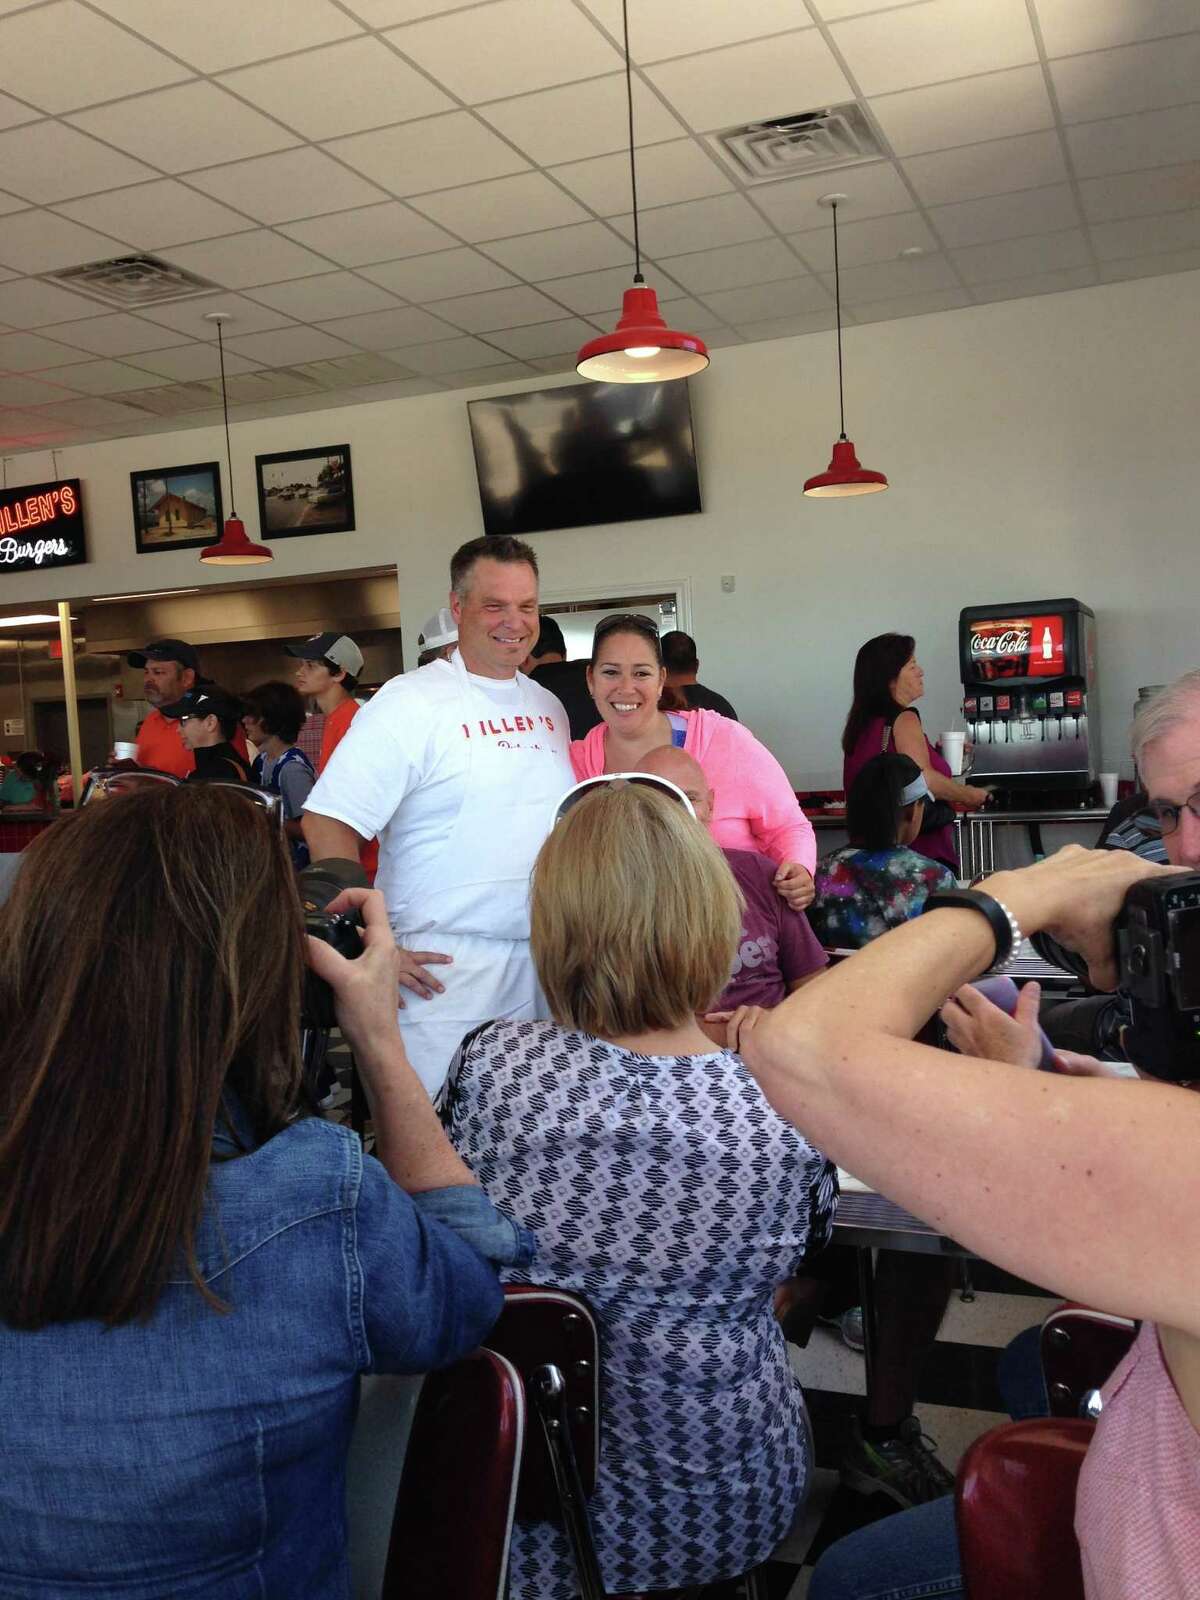 Scenes from the opening of Killen's Burgers, 2804 S. Main St., Pearland, on May 28. Shown: Ronnie Killen poses for a photo with a fan.